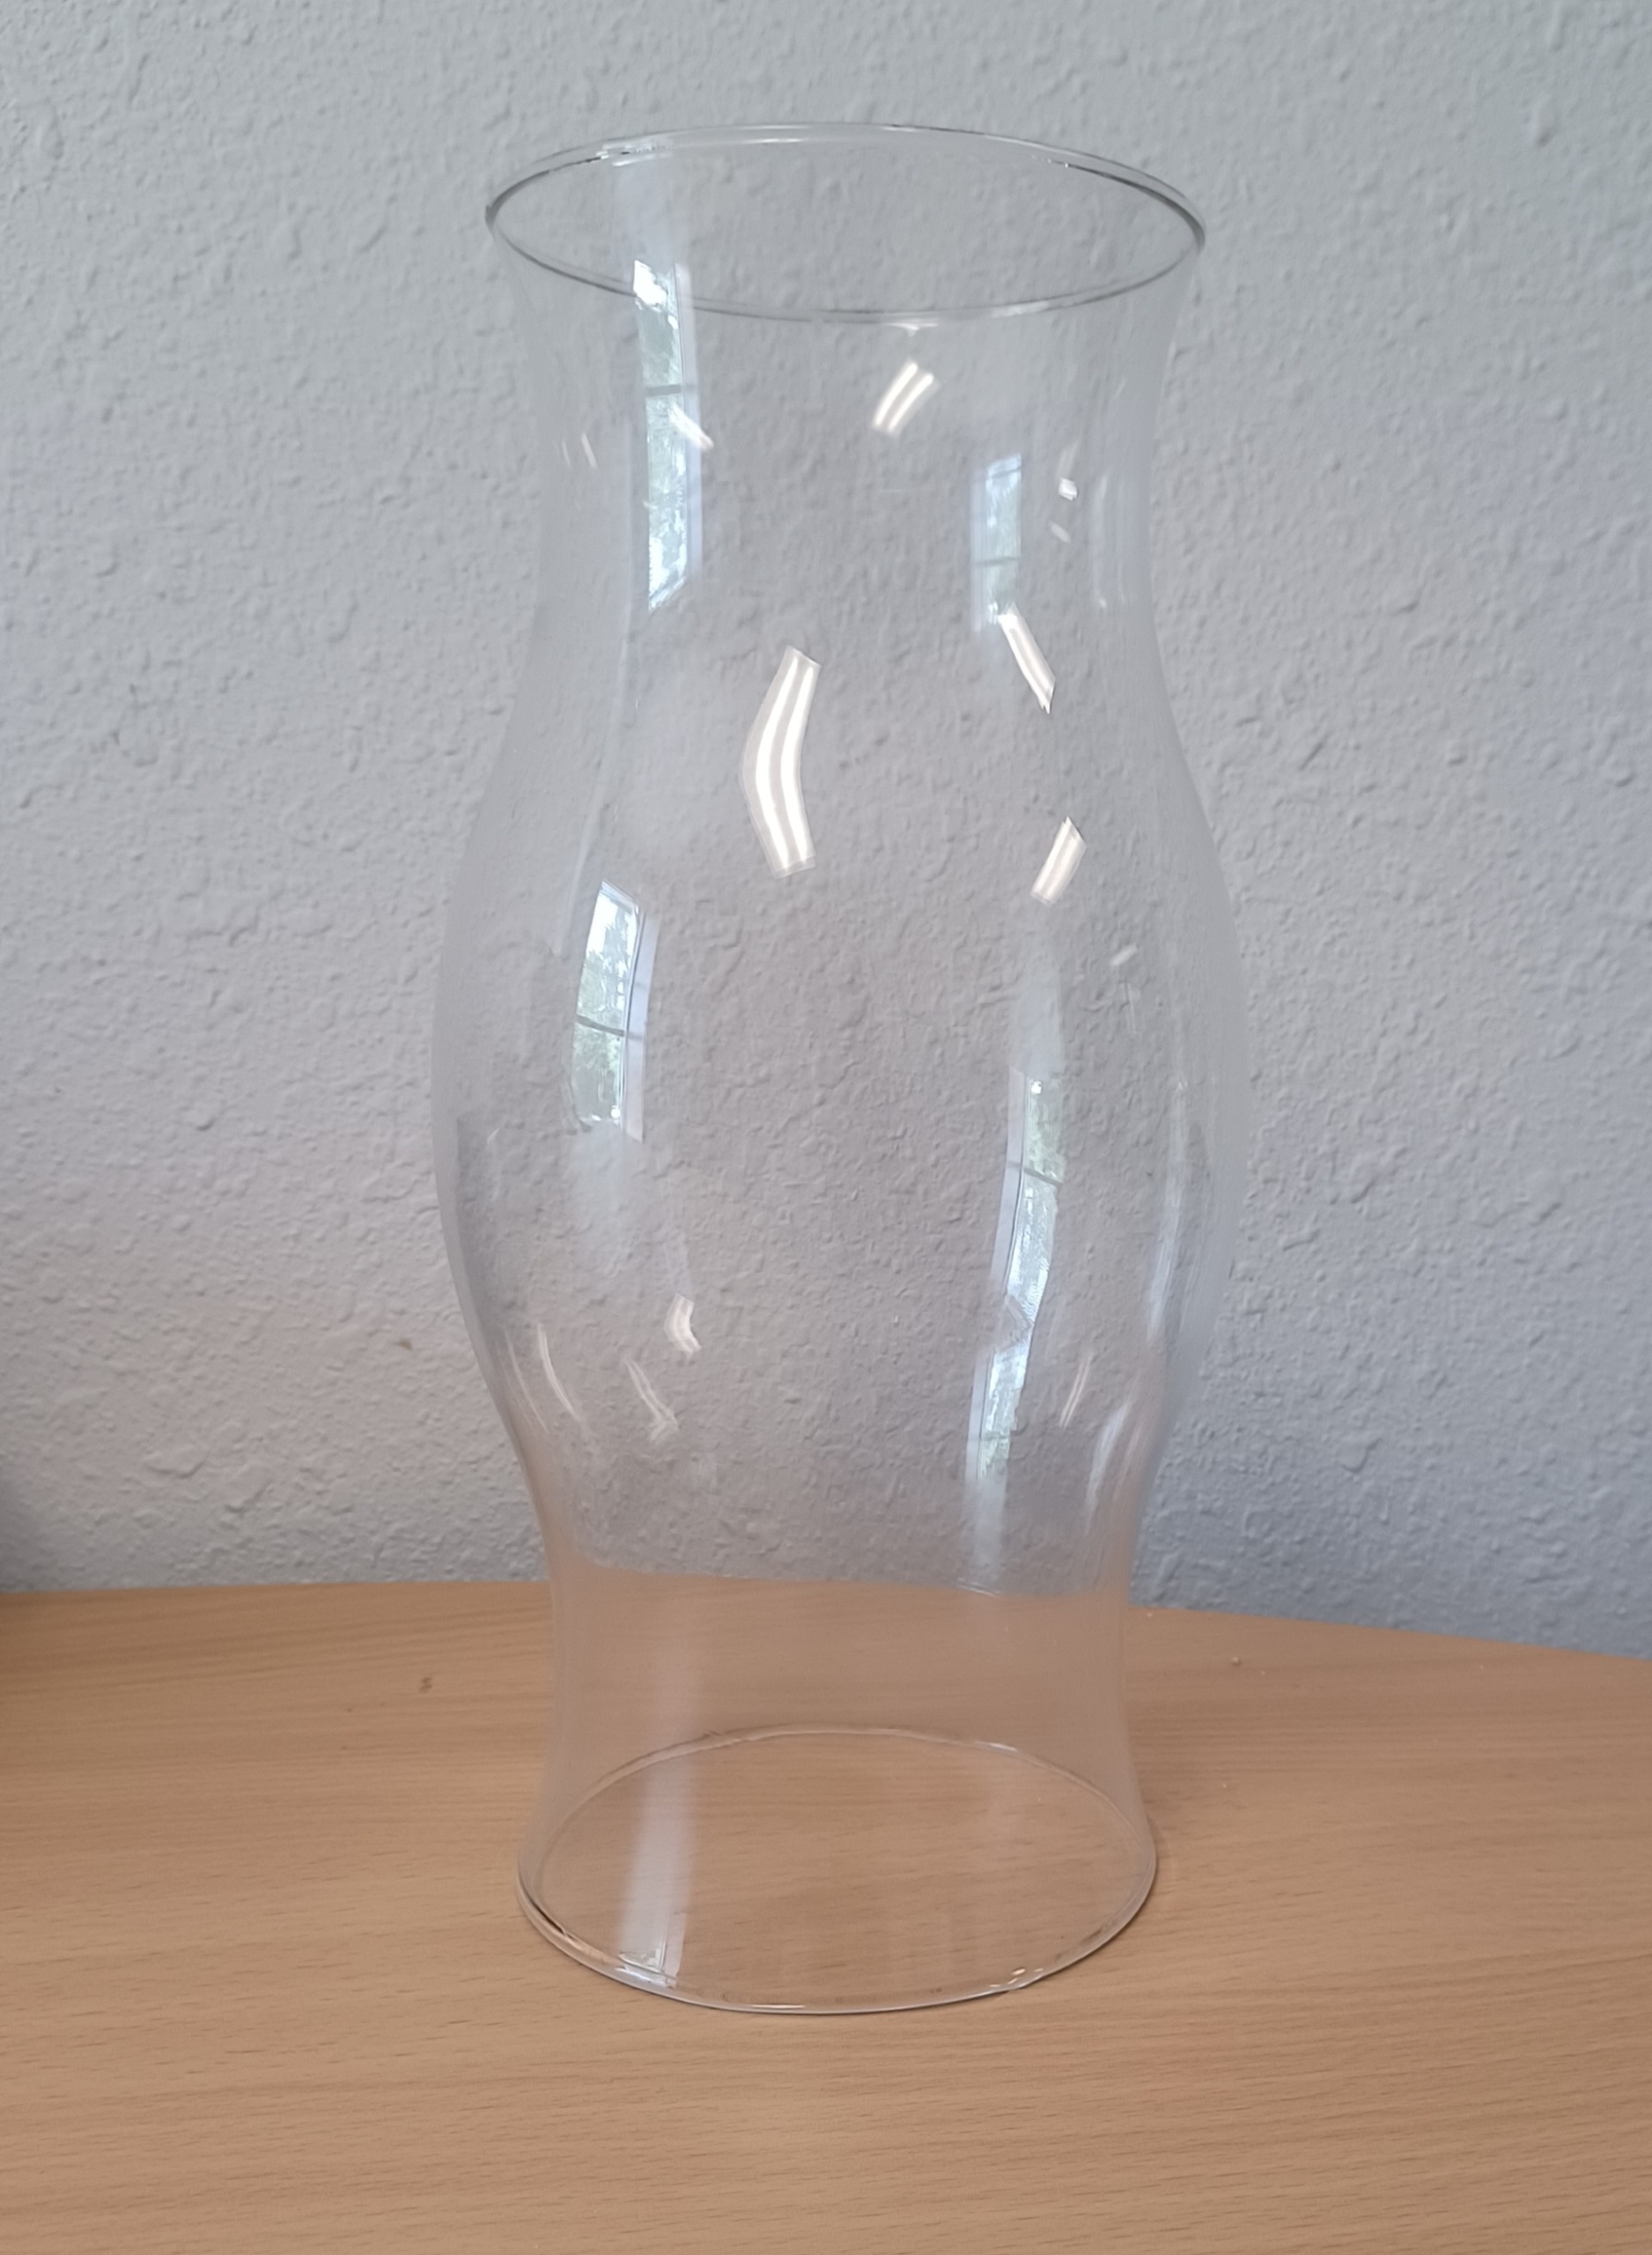 27-Inch Tall Glass Eiffel Tower Vase, Rental Table Accessories